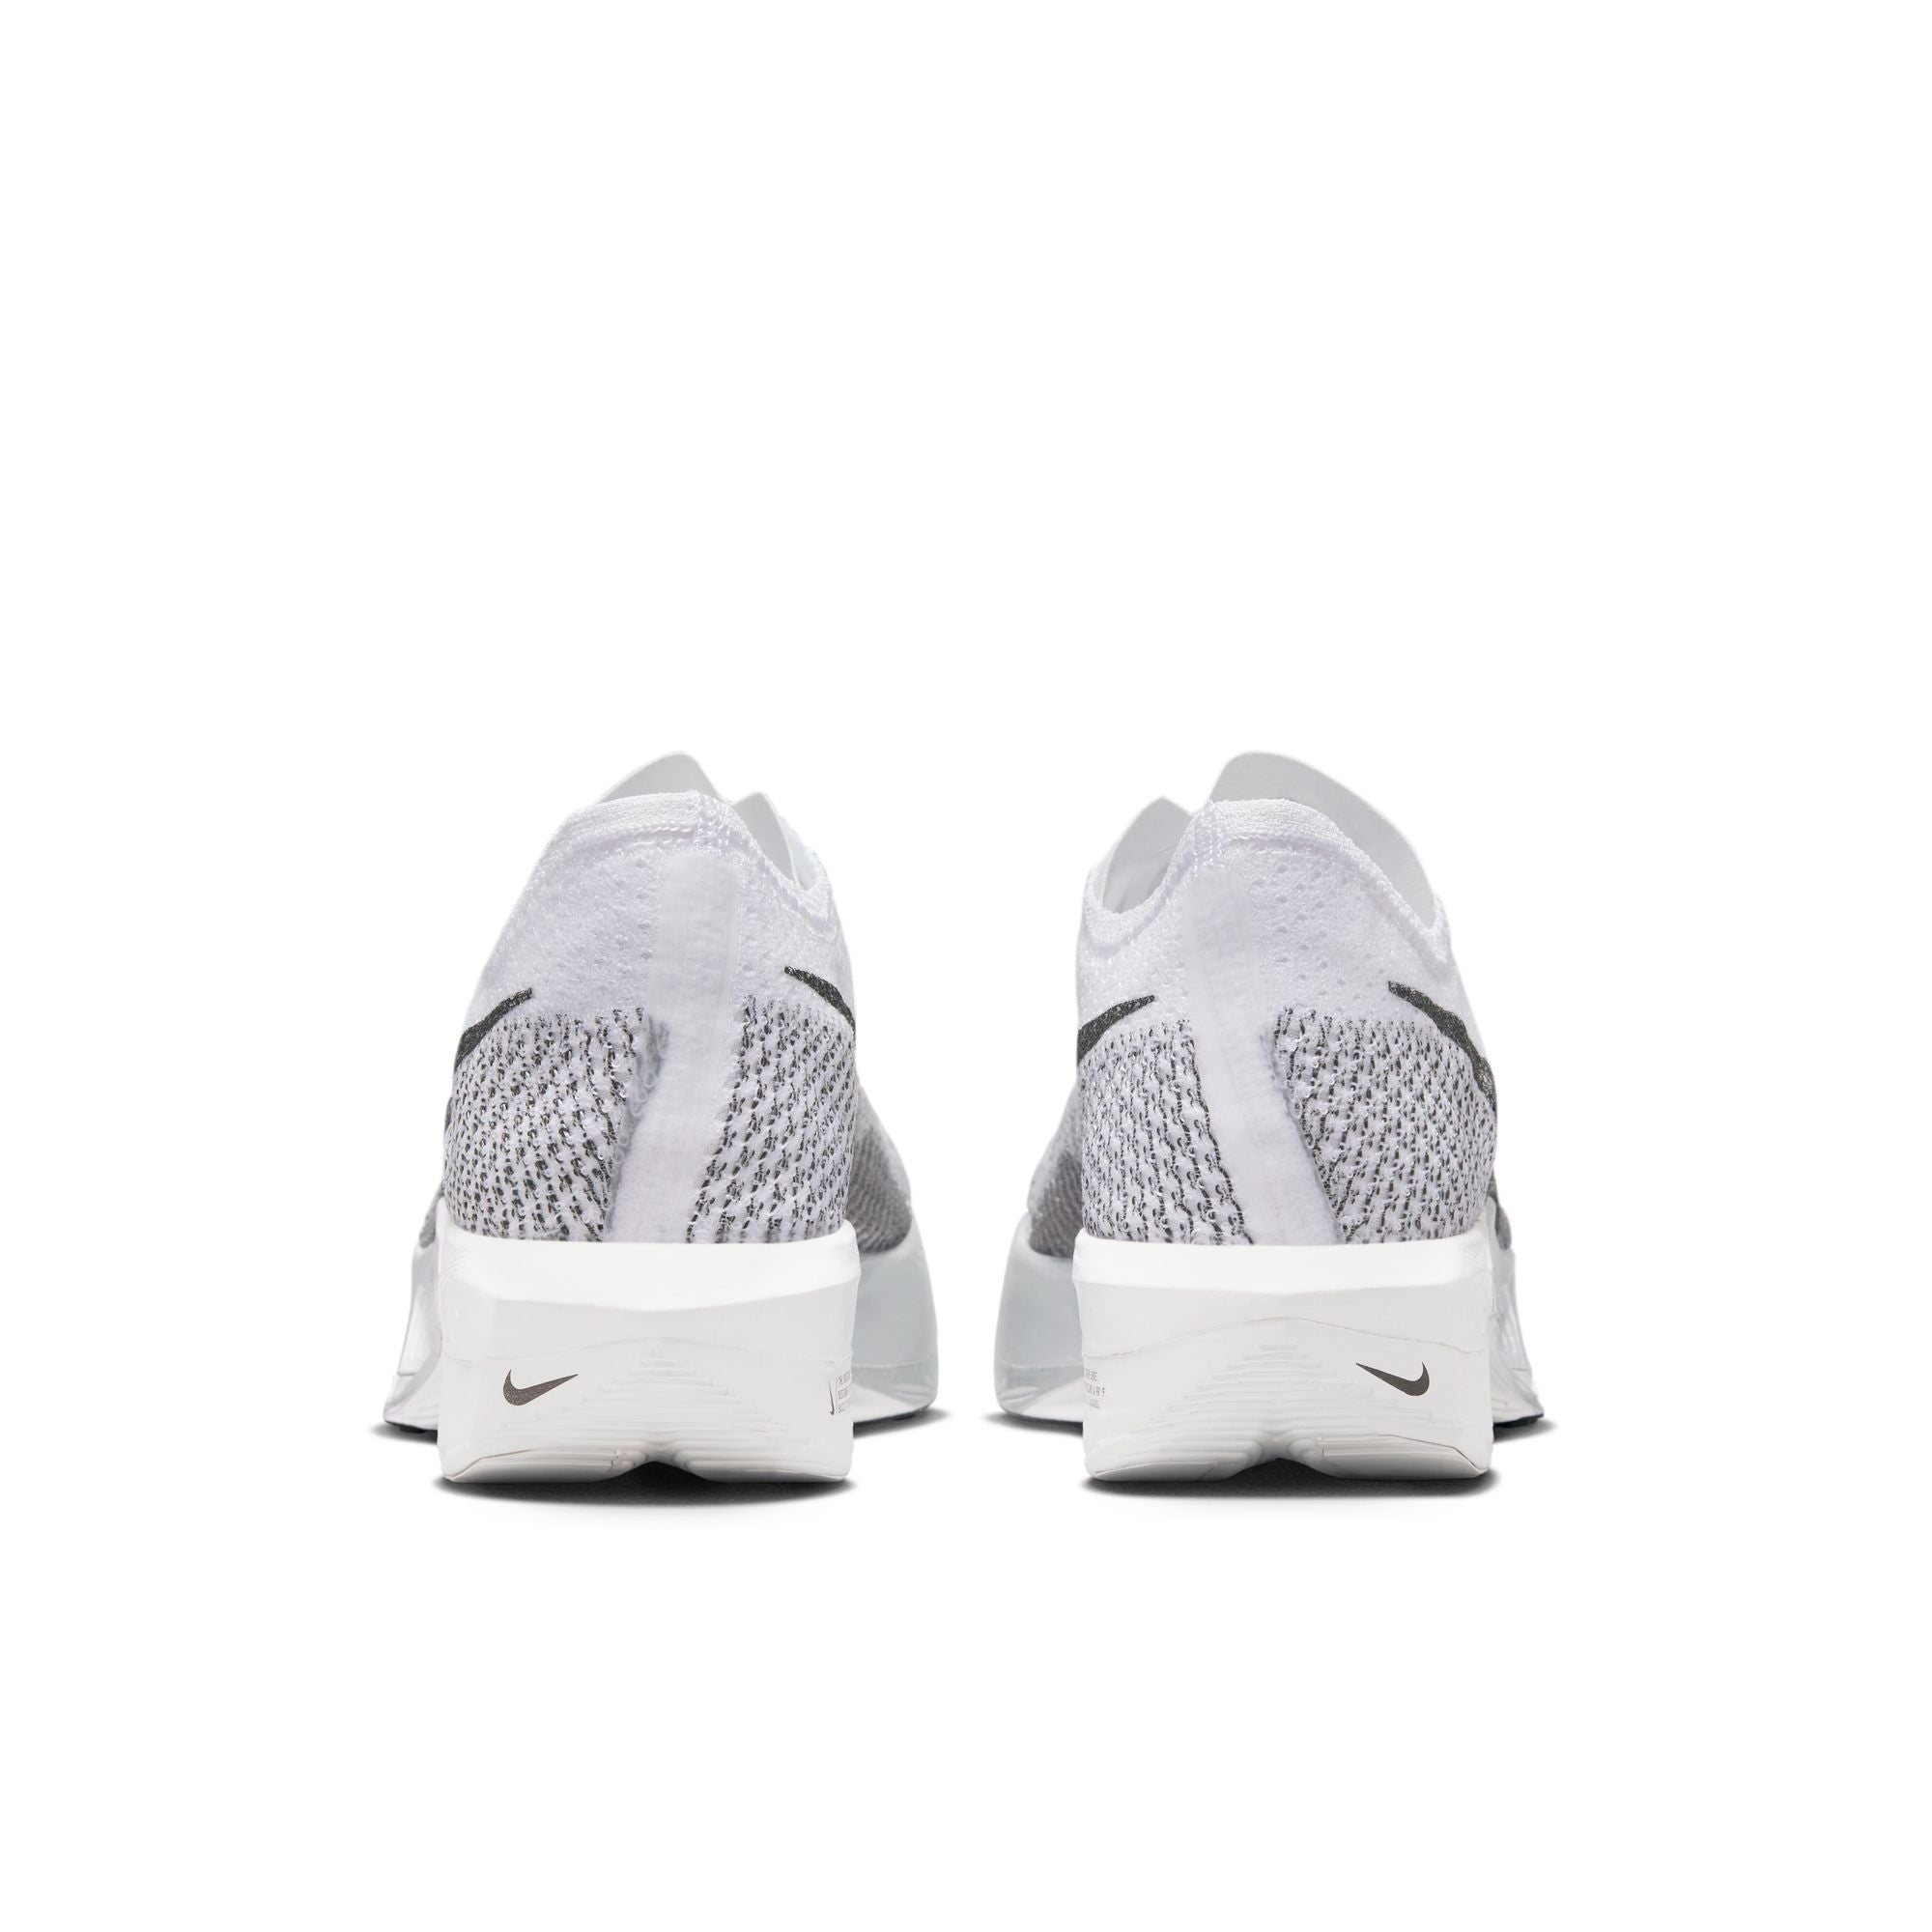 back view of womens vaporfly 3